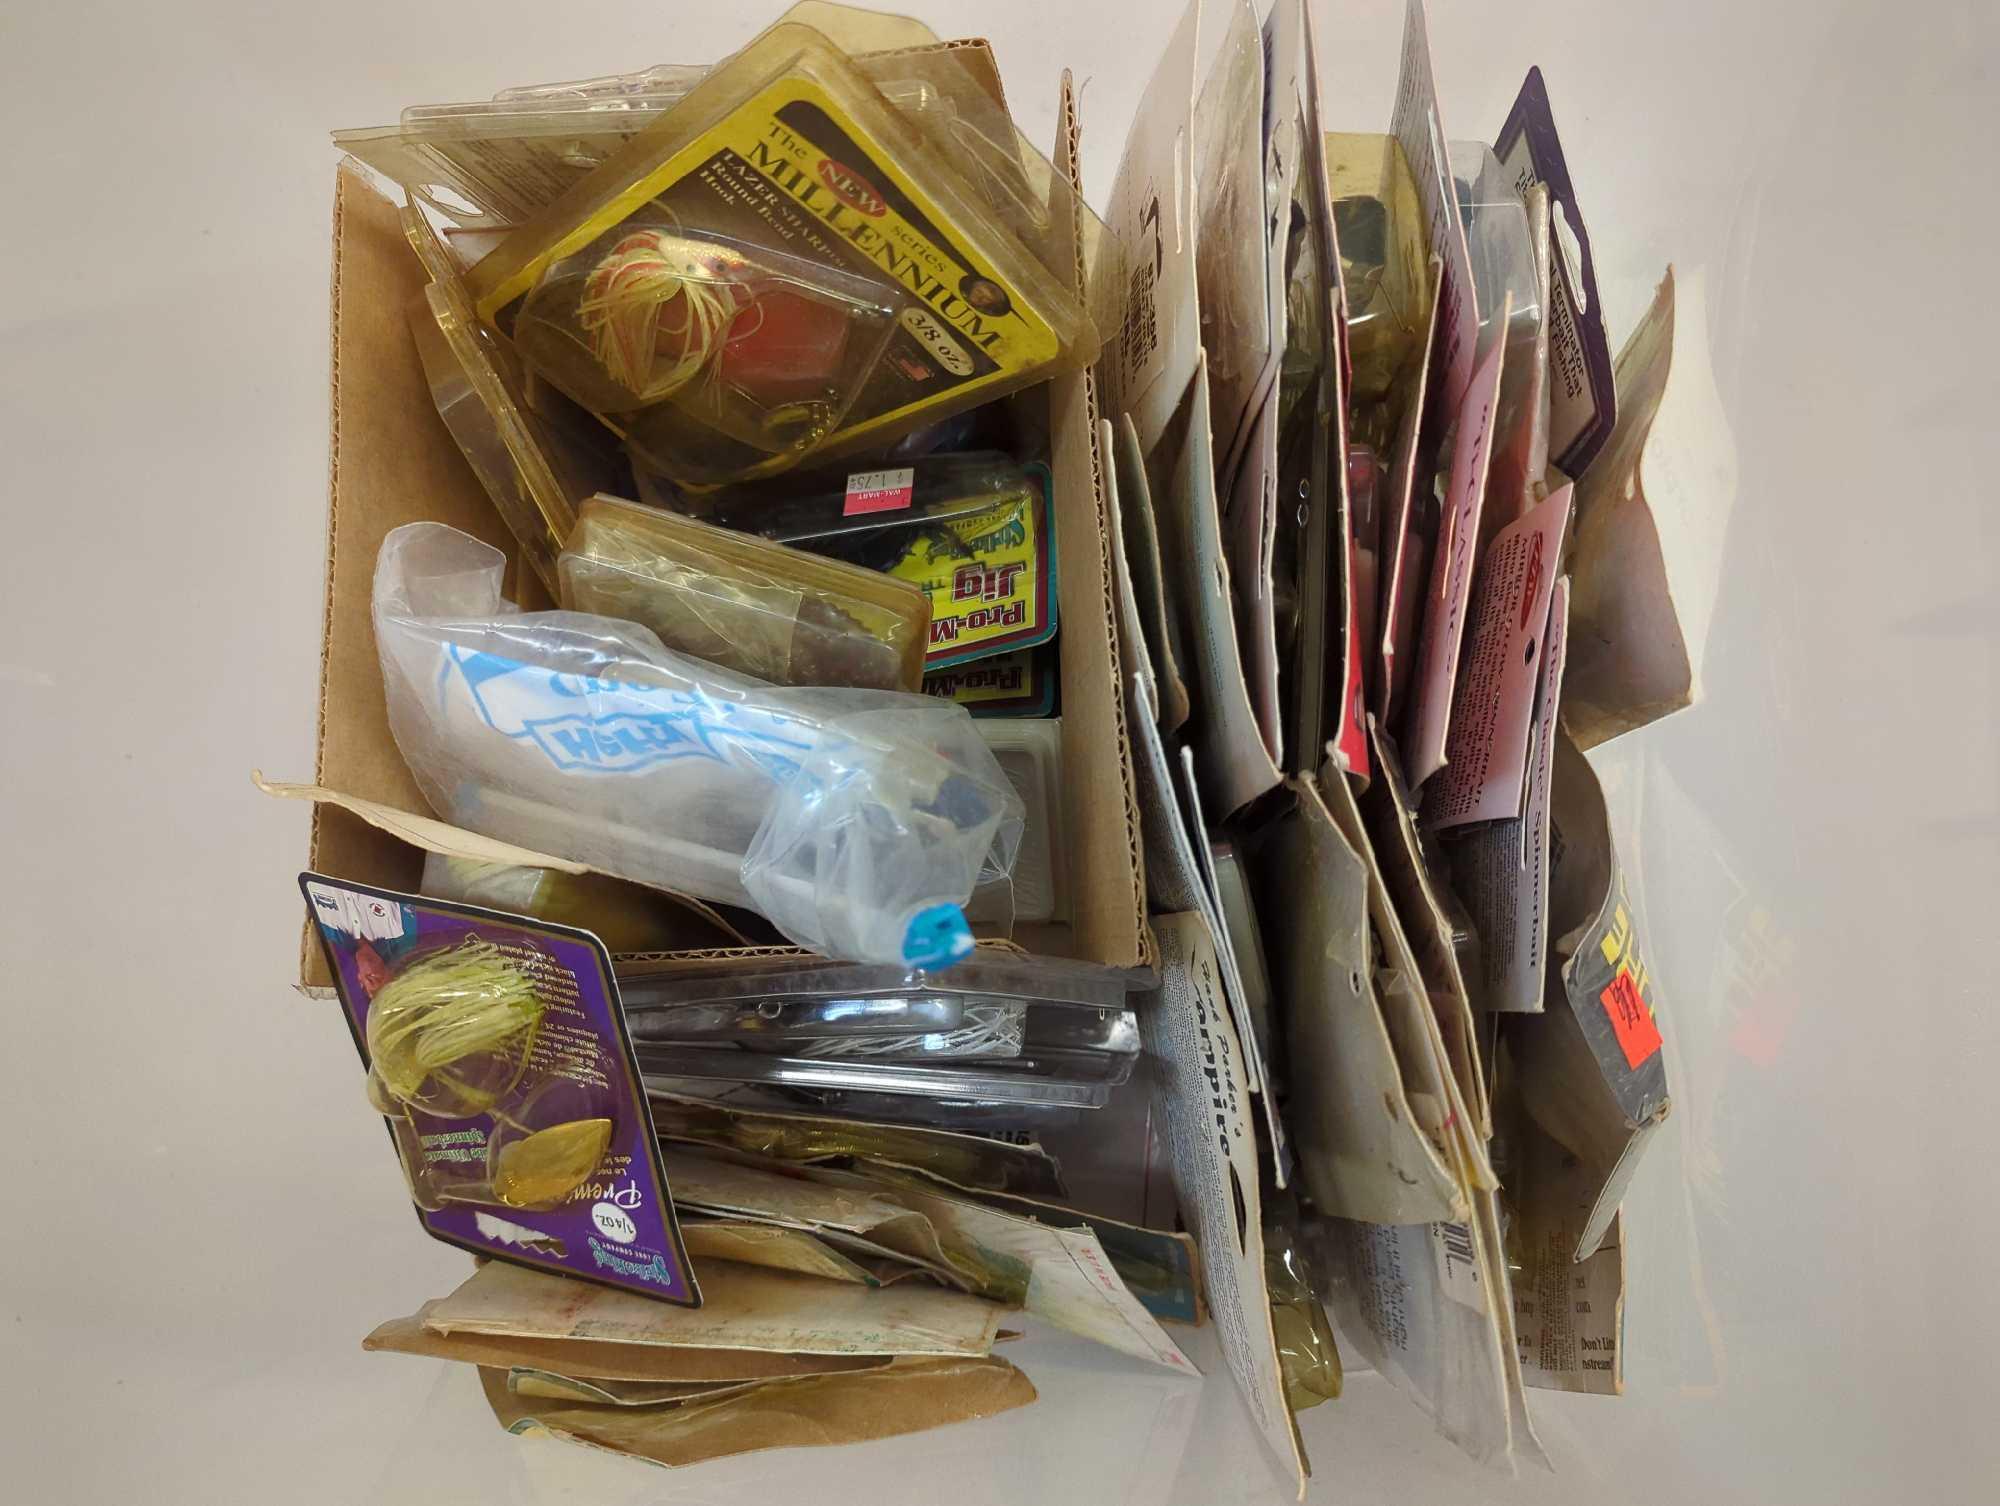 Clear organizer tote and contents including various fishing lures and other fishing accessories.